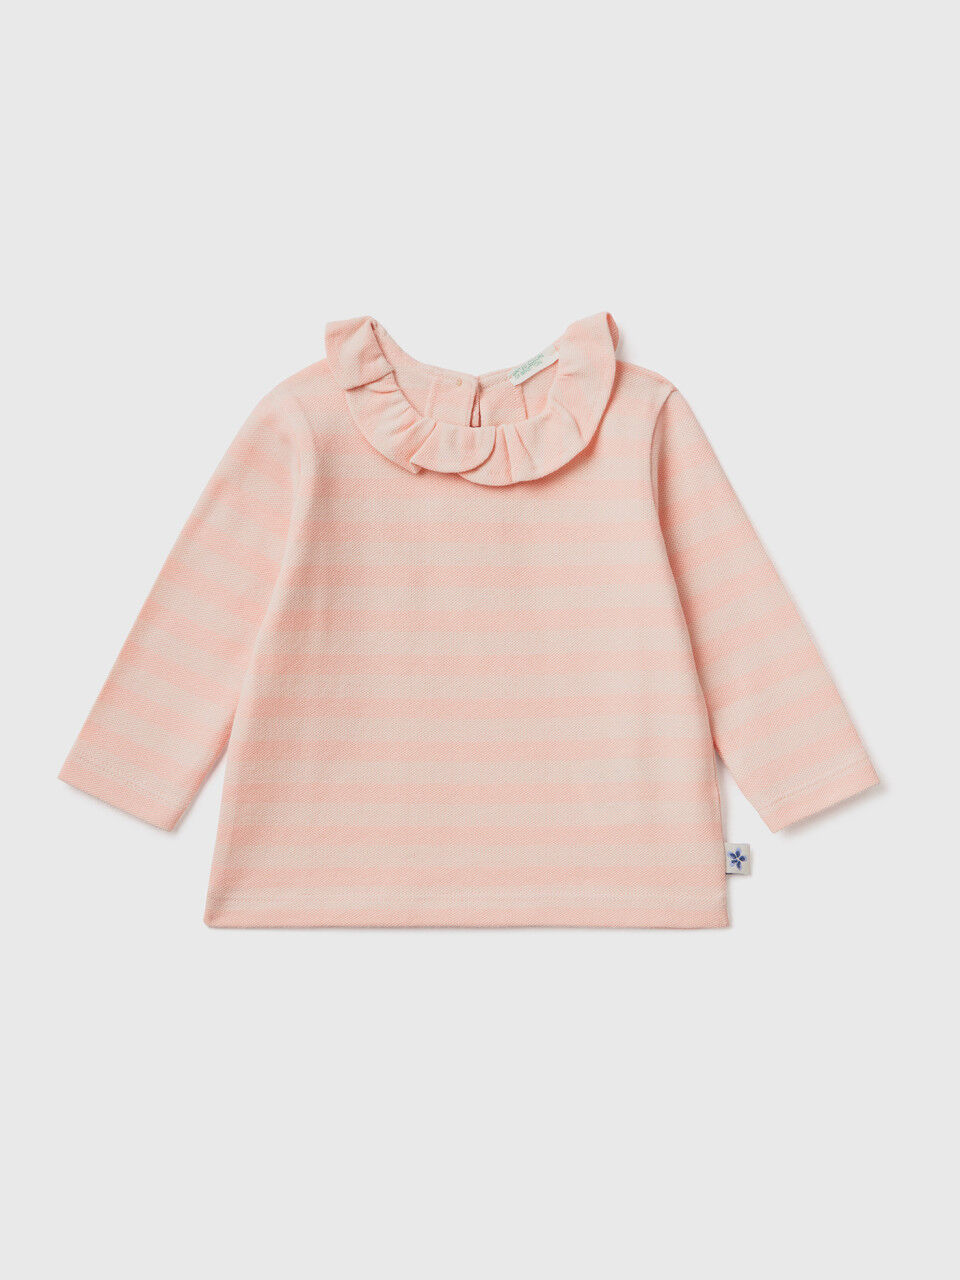 Striped t-shirt with collar